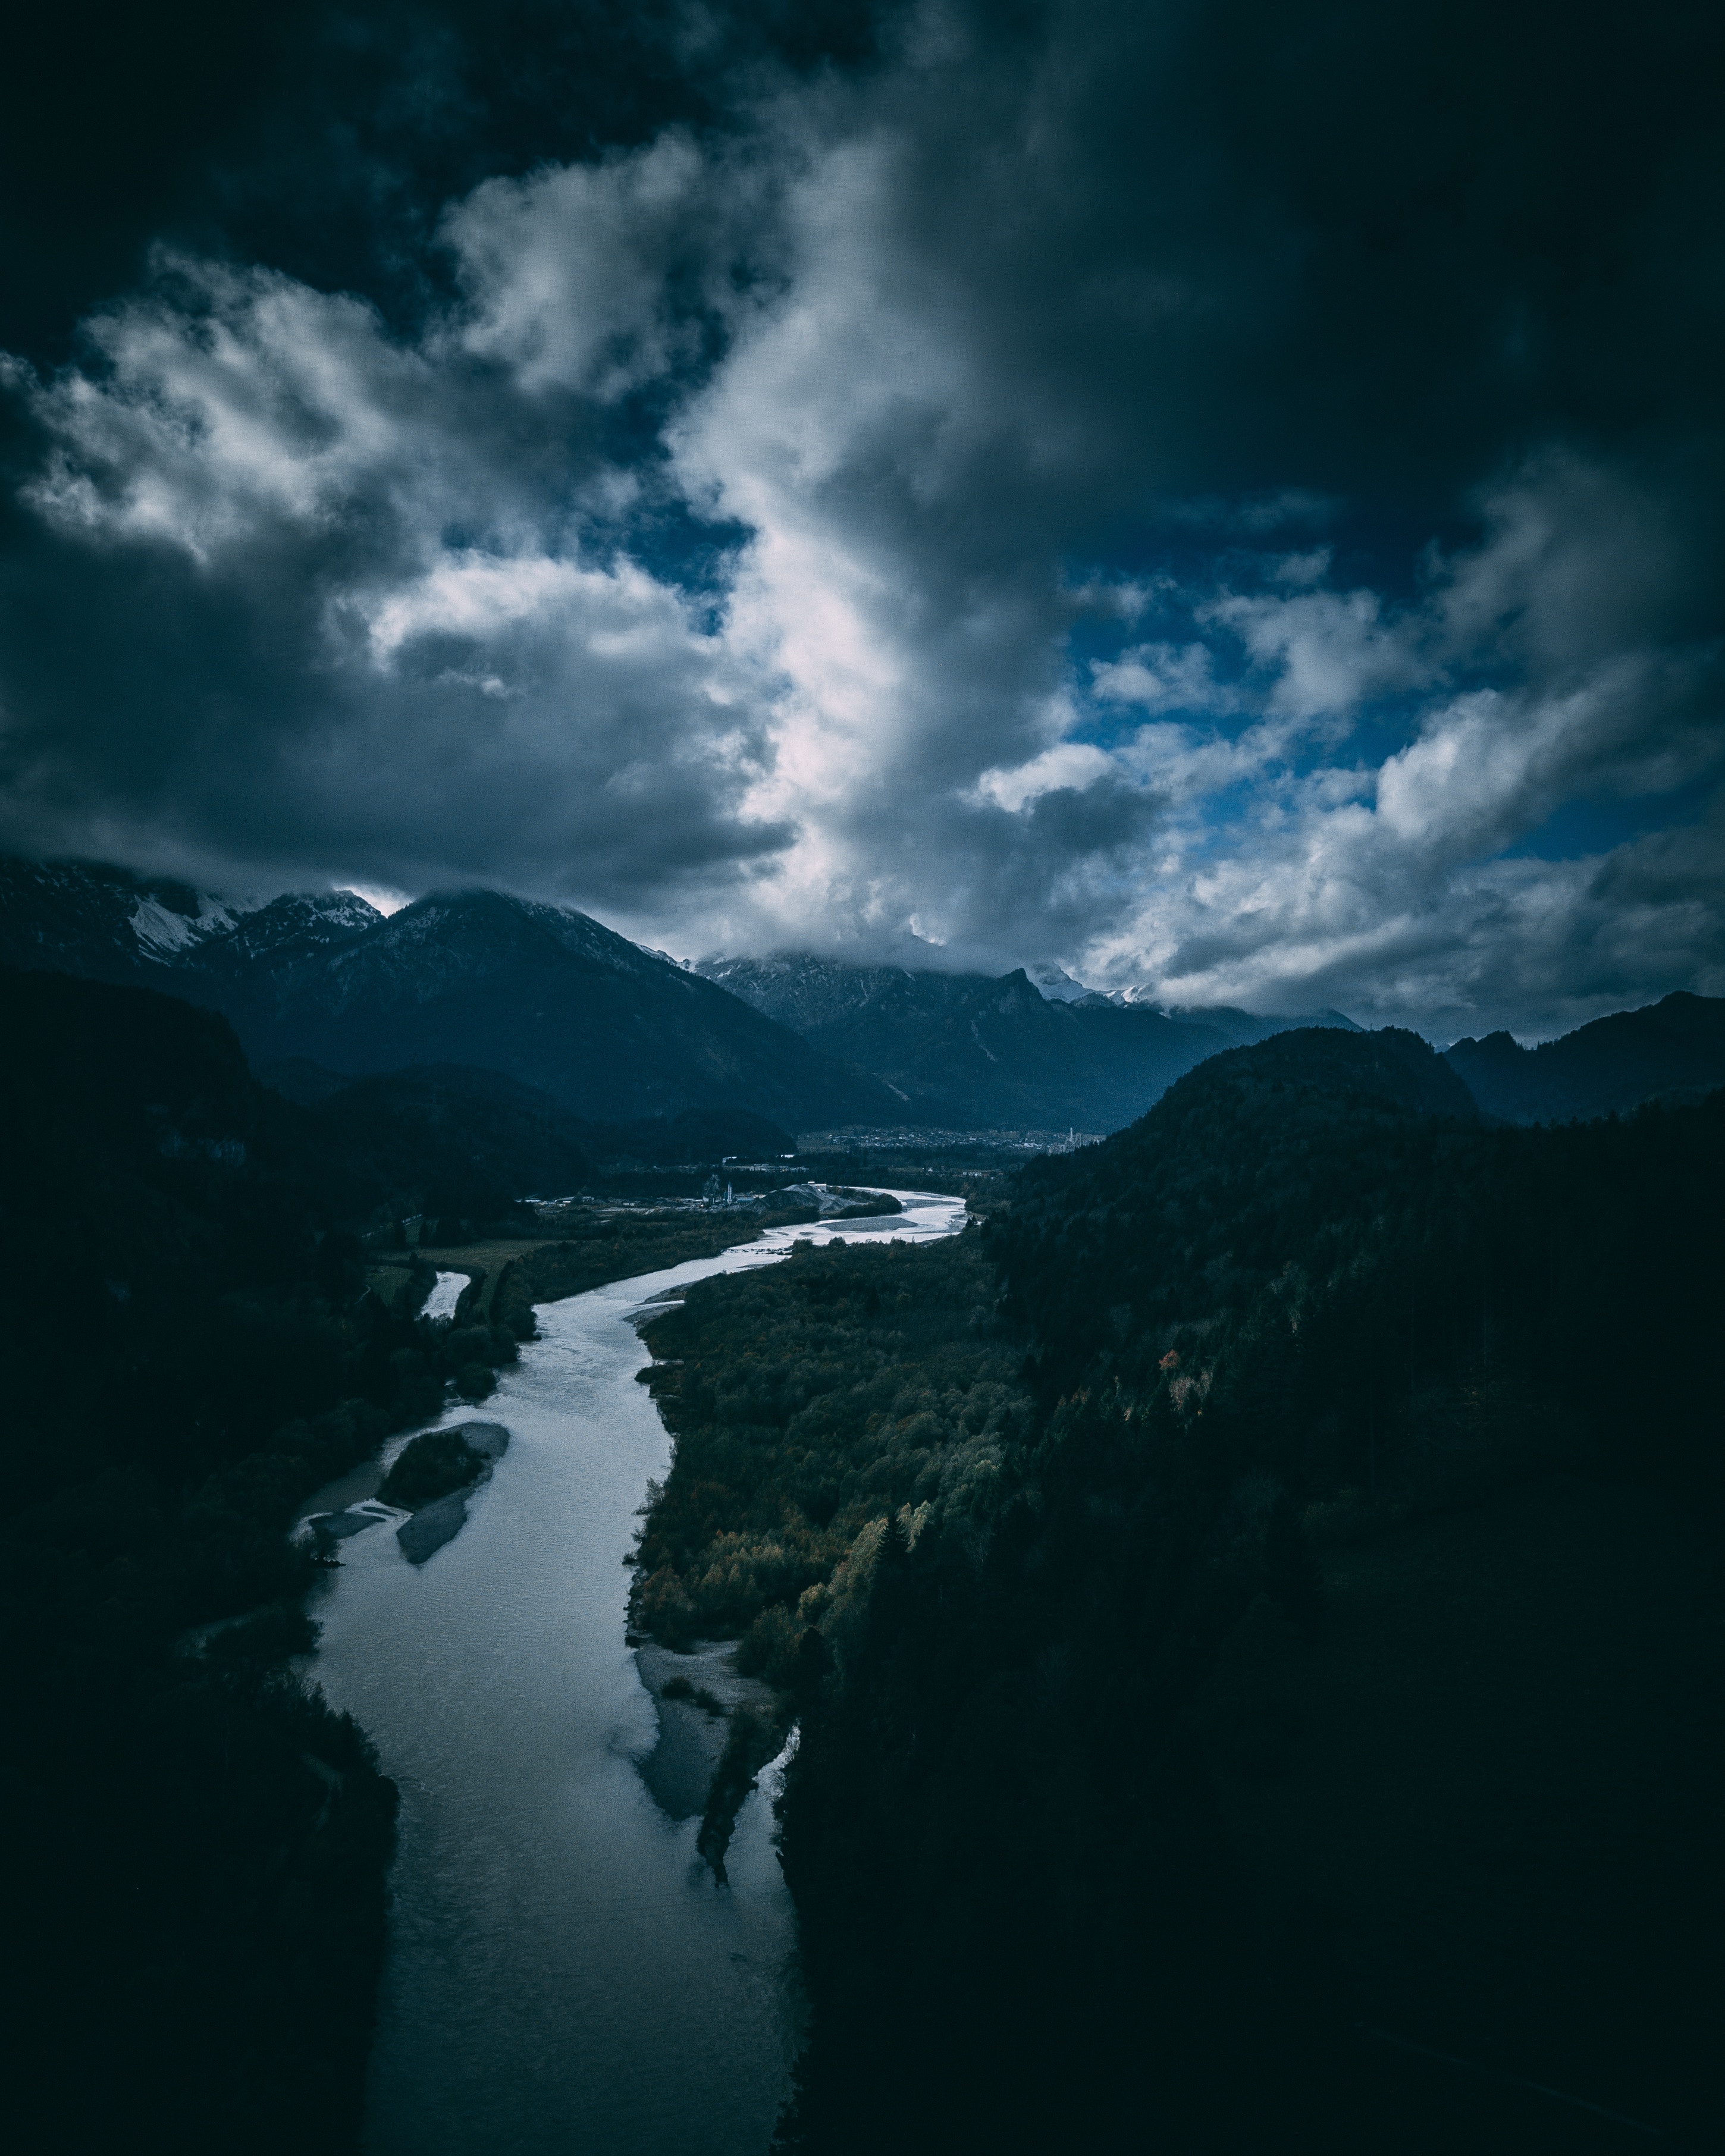 germany, trees, sky, clouds, nature, rivers, mountains, view from above High Definition image